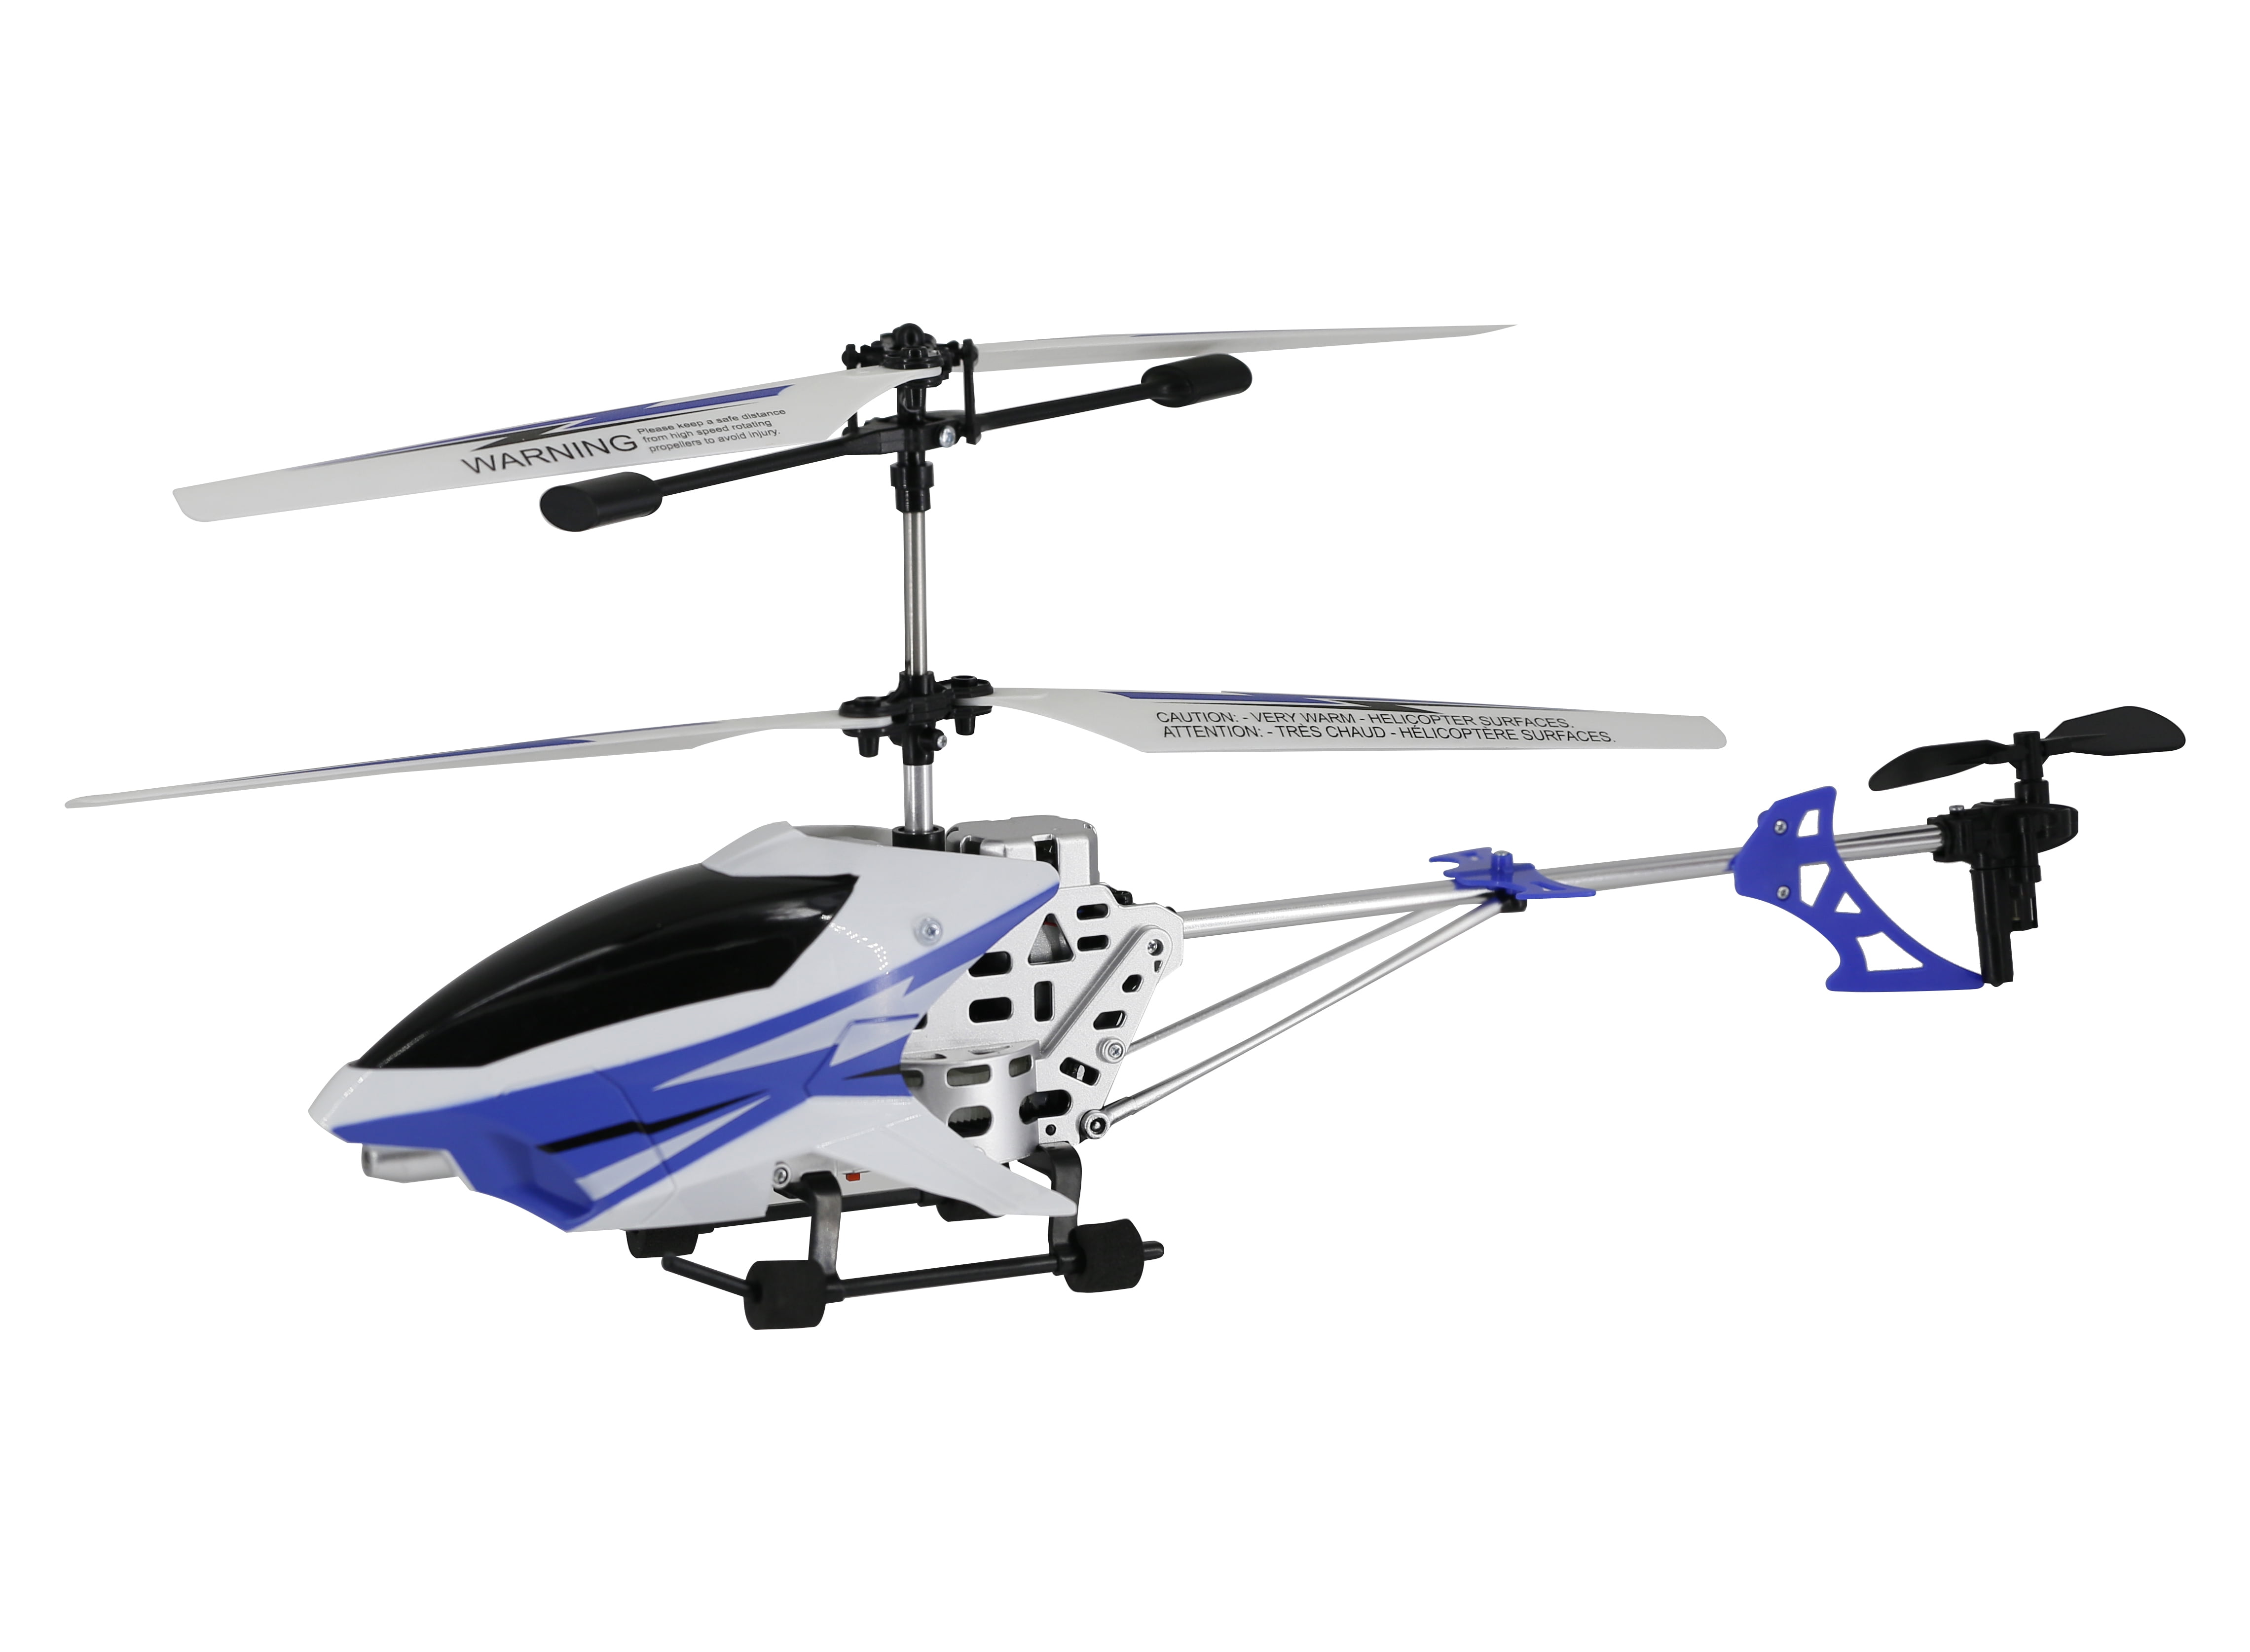 Remote controled mini helicopter by Bladez  New/Boxed 